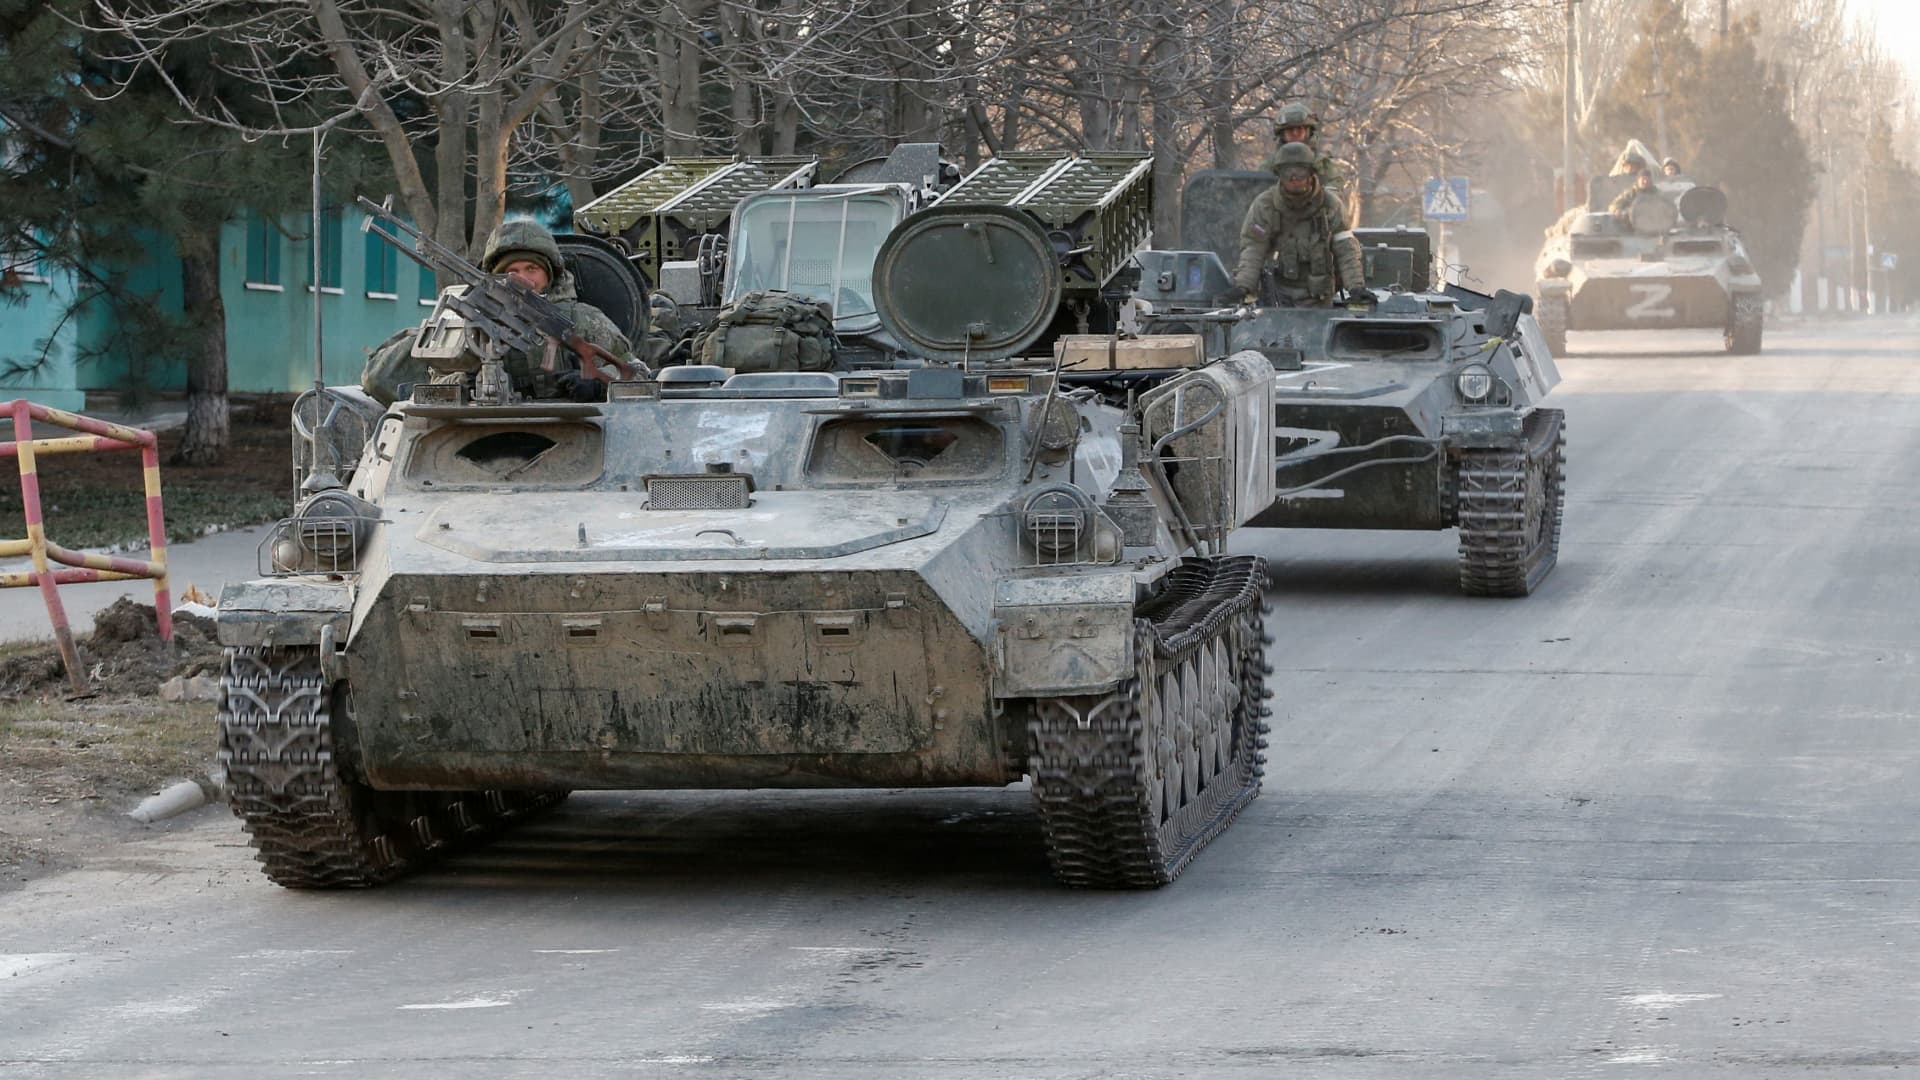 Service members of pro-Russian troops are seen atop of armoured vehicles in the course of Ukraine-Russia conflict in Dokuchaievsk in the Donetsk region, Ukraine March 25, 2022.